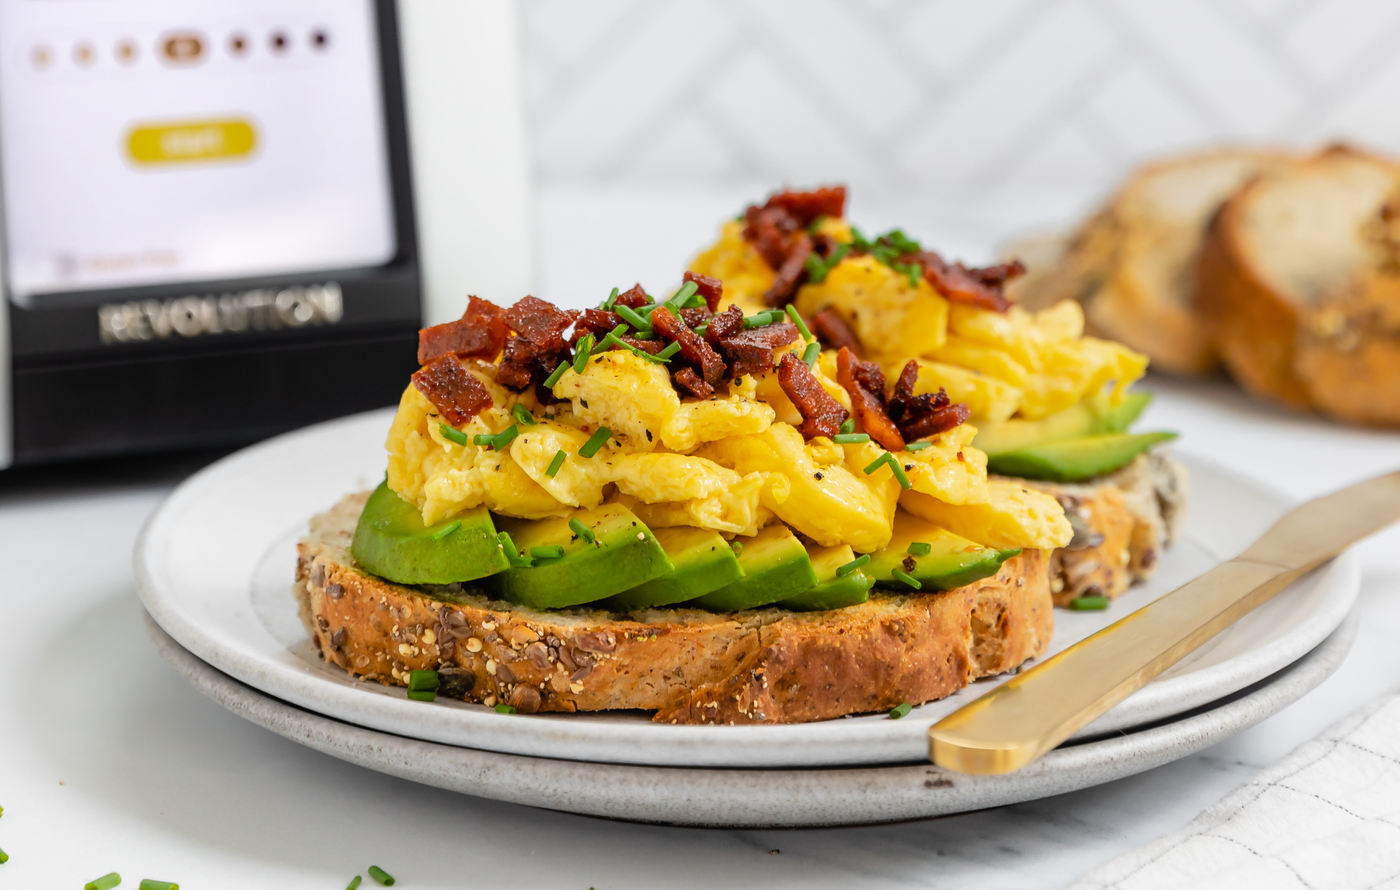 Loaded Avocado Toast with Soft Scrambled Eggs